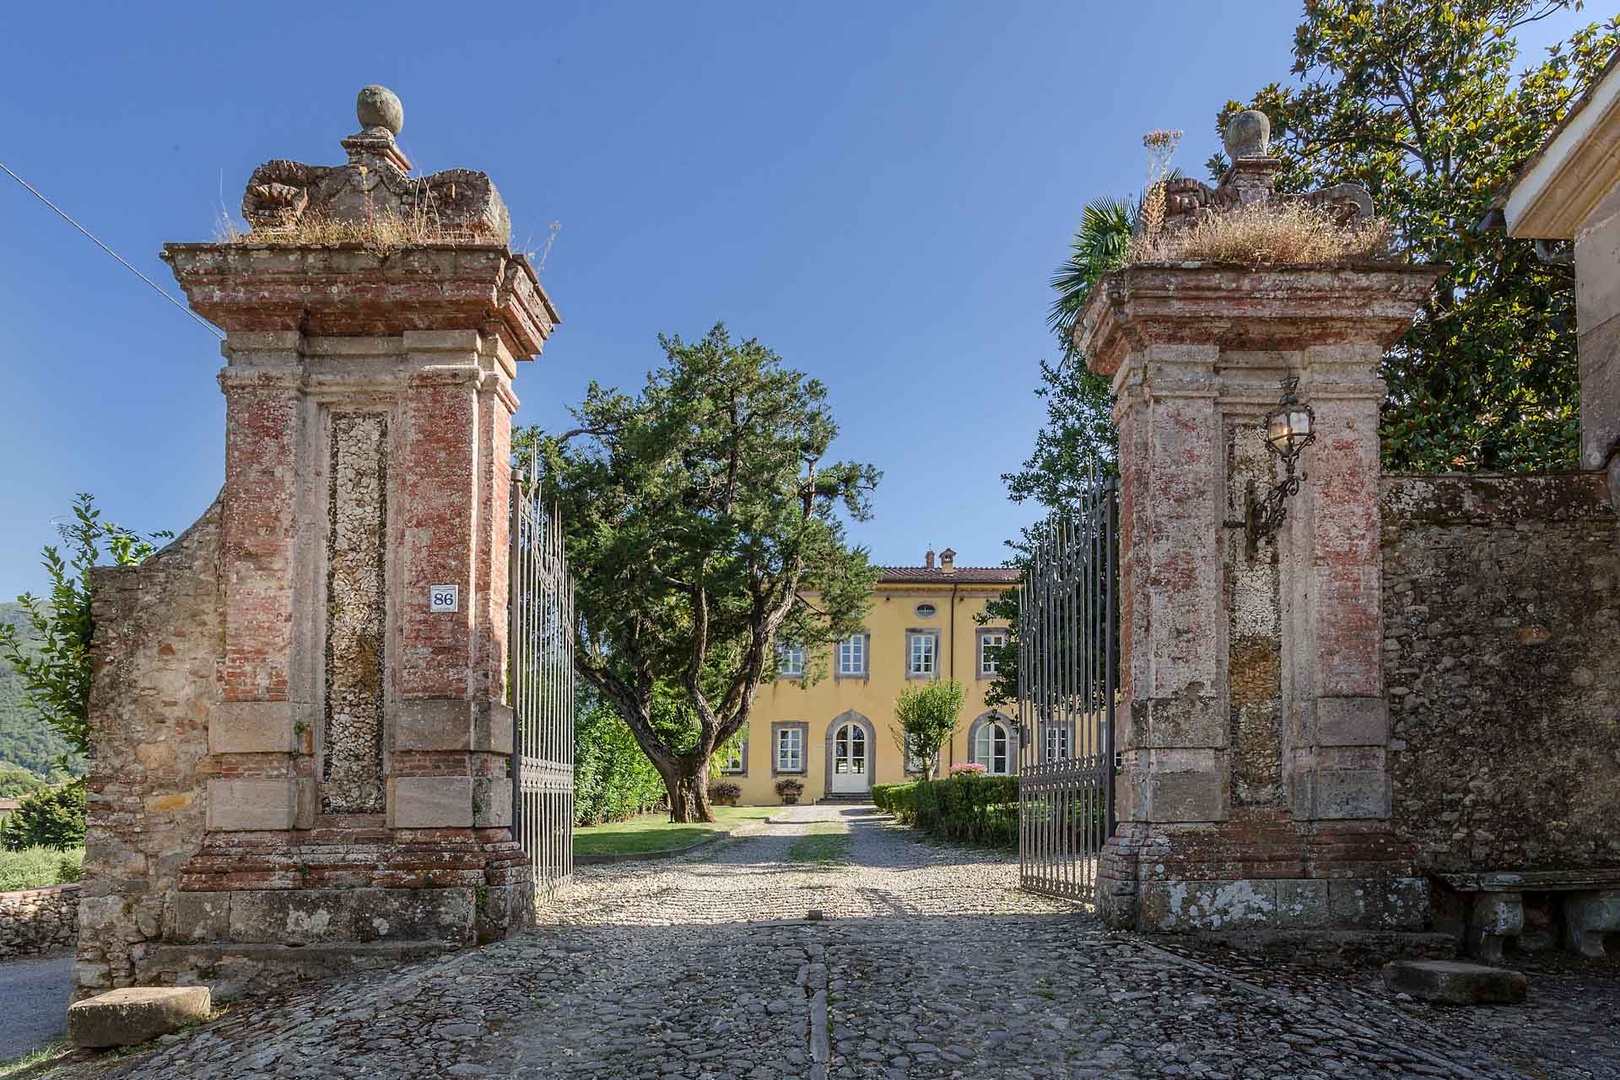 Historic gated entrance transports you back in time